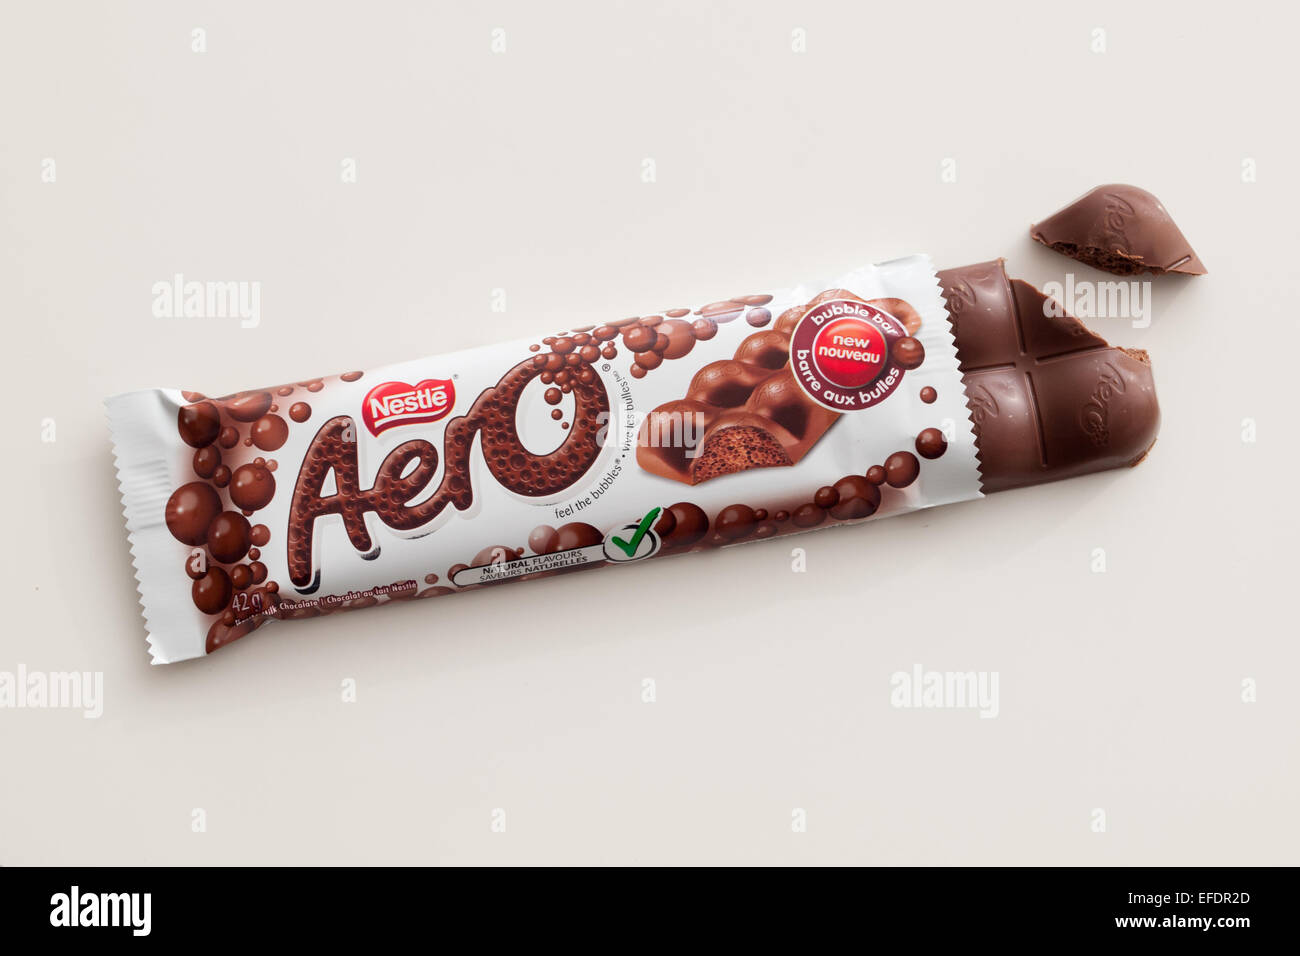 how are aero chocolate bars made and how did they get all the bubbles in an aero chocolate bar